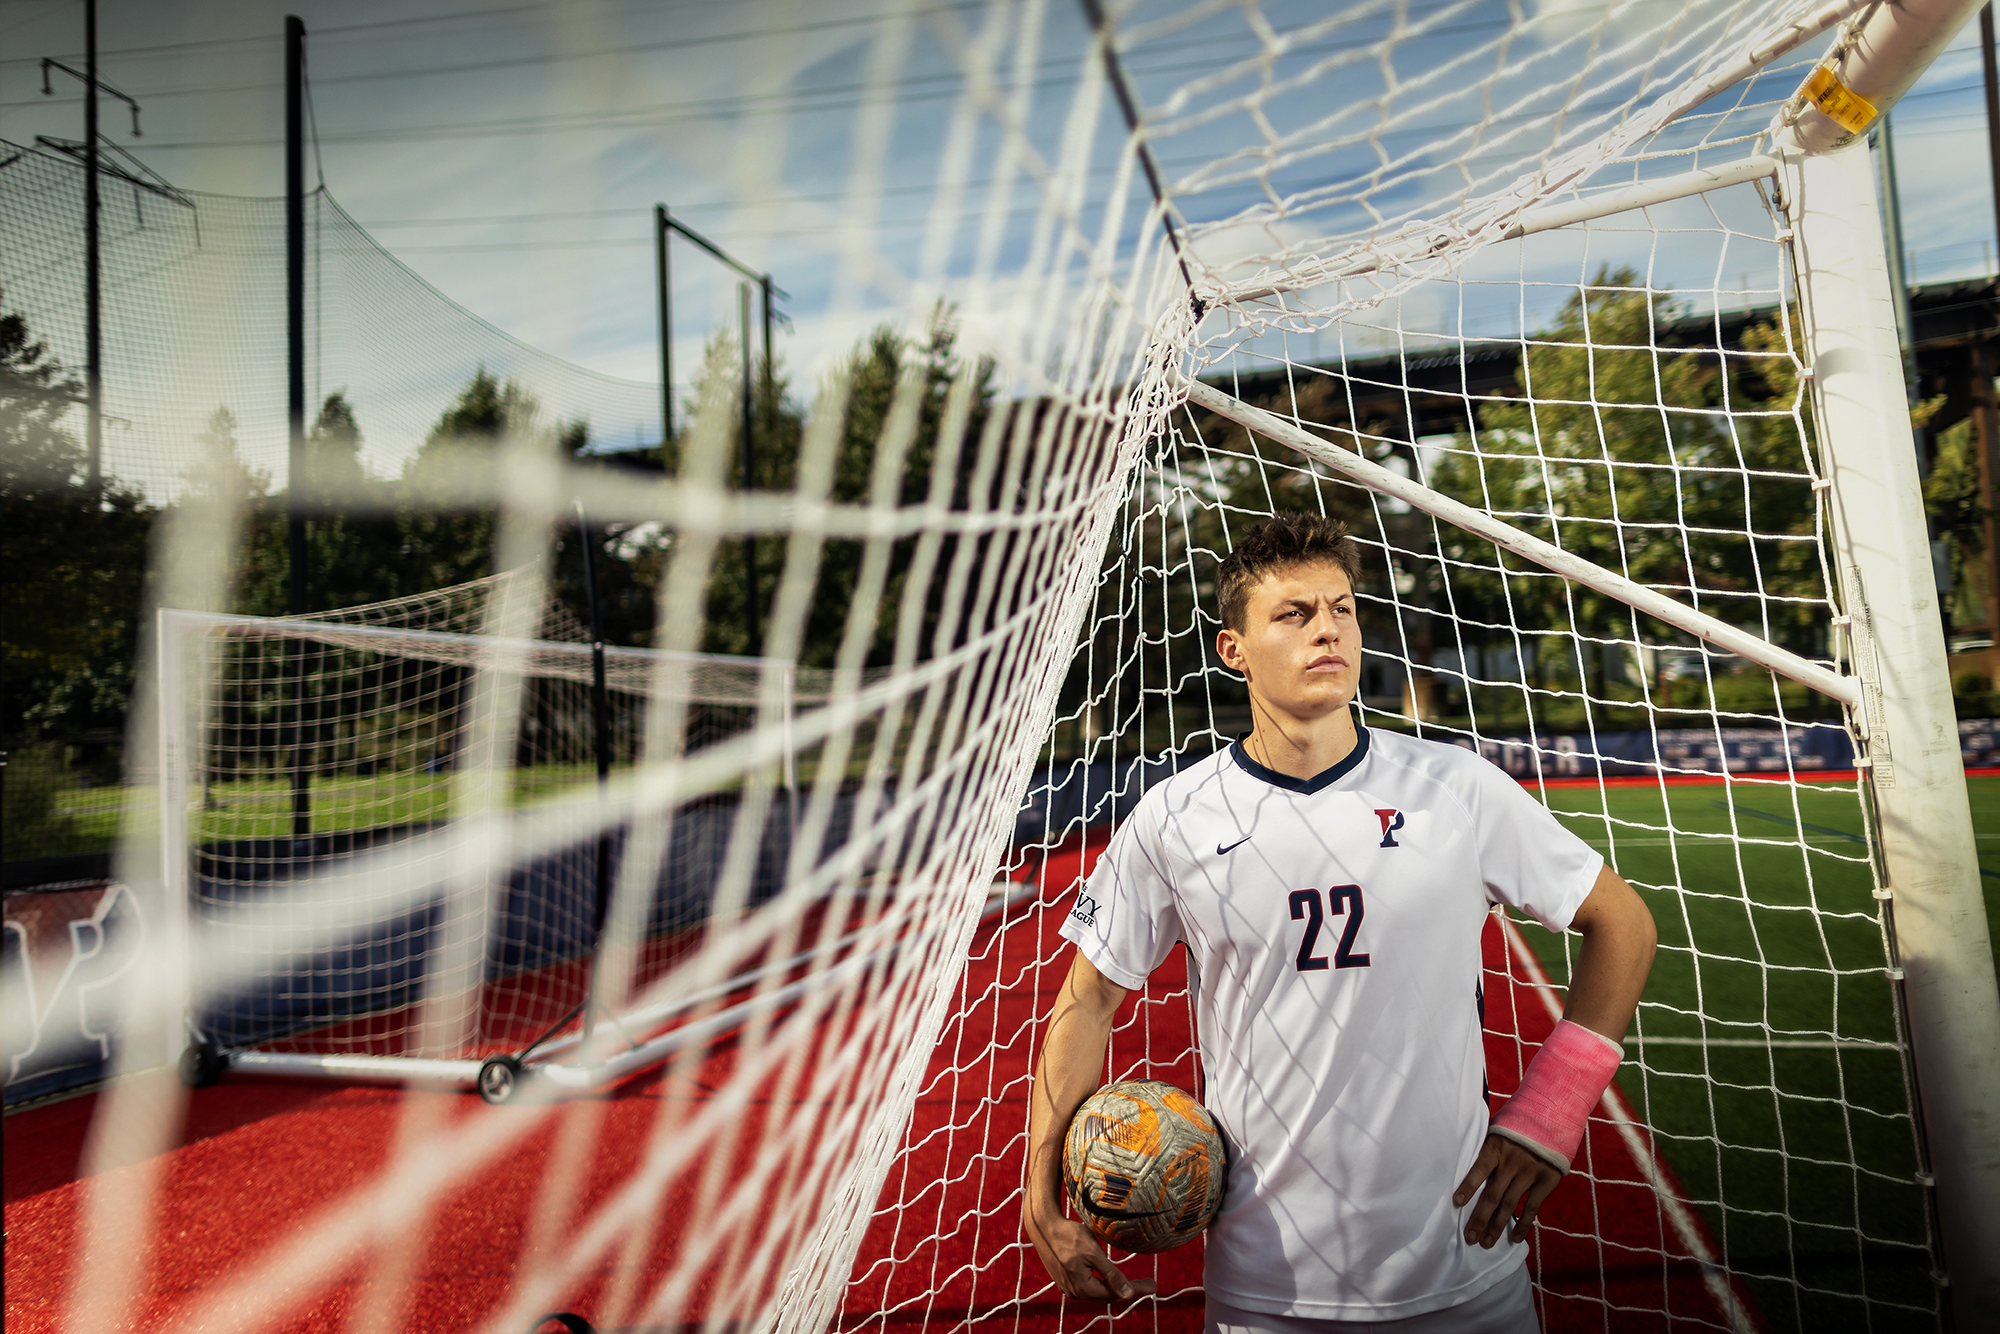 Stas Korzeniowski stands inside a goal at Penn Park holding a soccer ball on his right side.